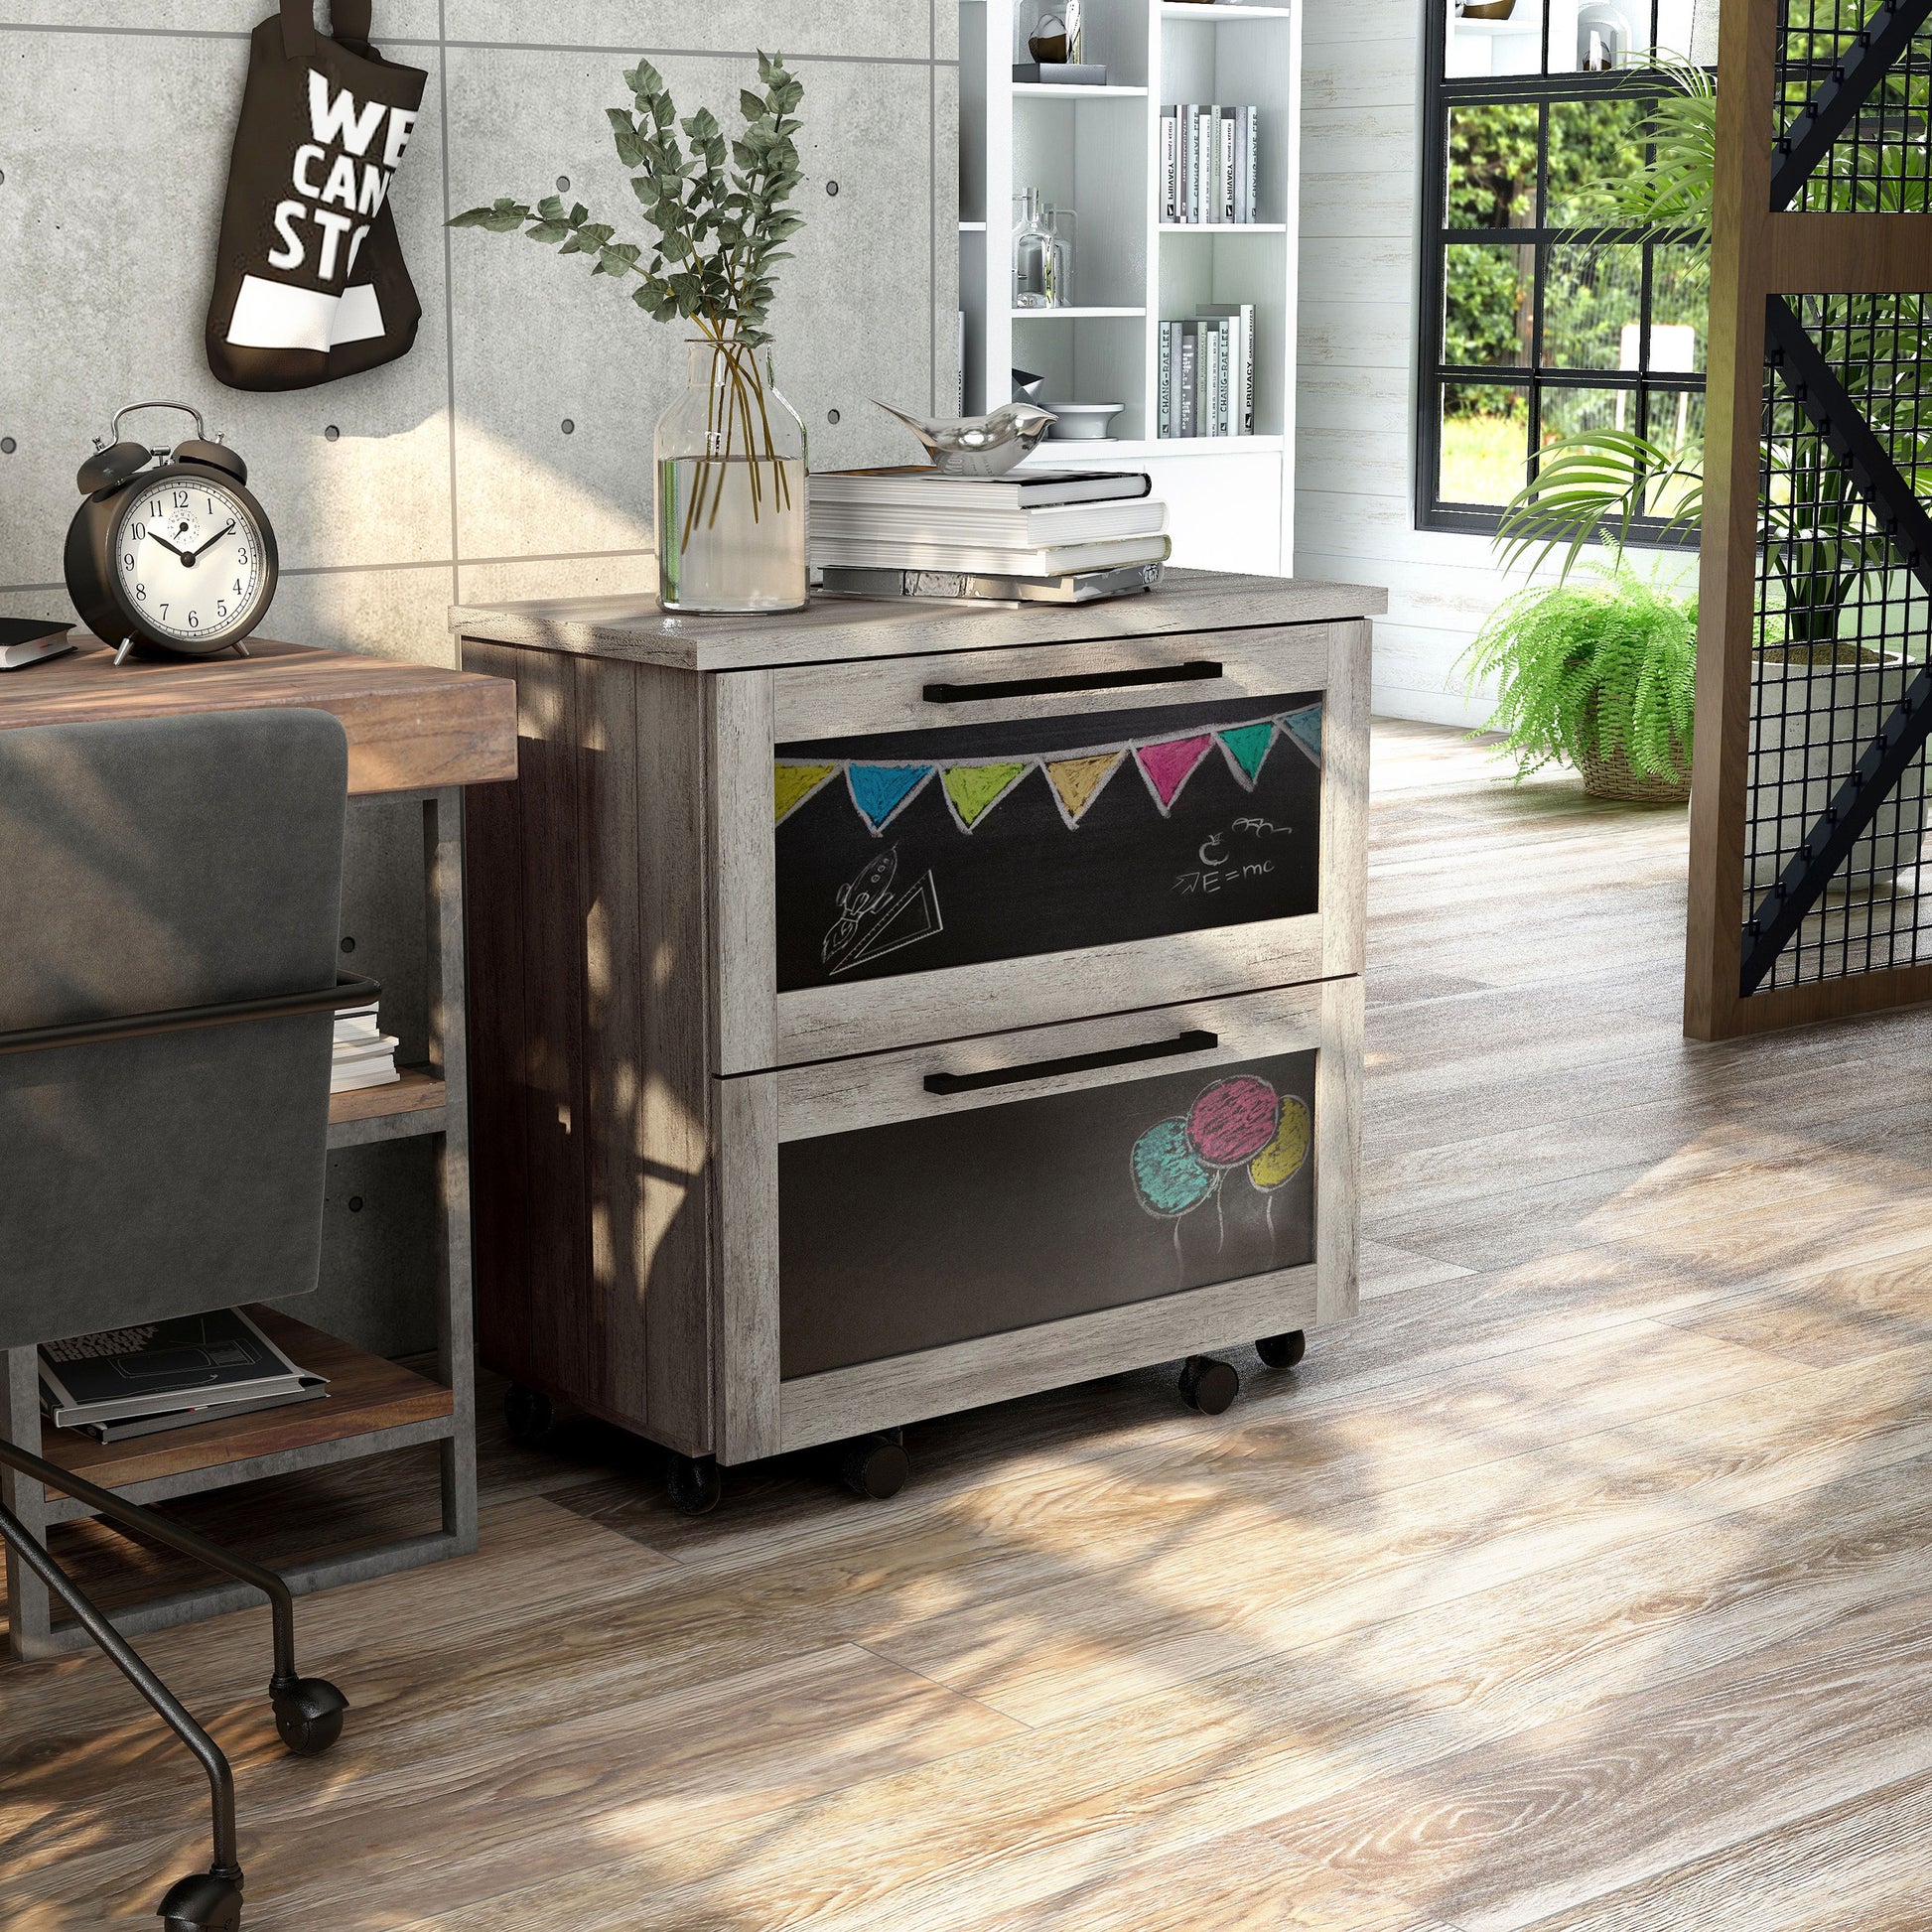 Right angled rustic vintage gray oak two-drawer mobile filing cabinet with chalkboard drawer fronts in a home office with accessories and chalk drawings